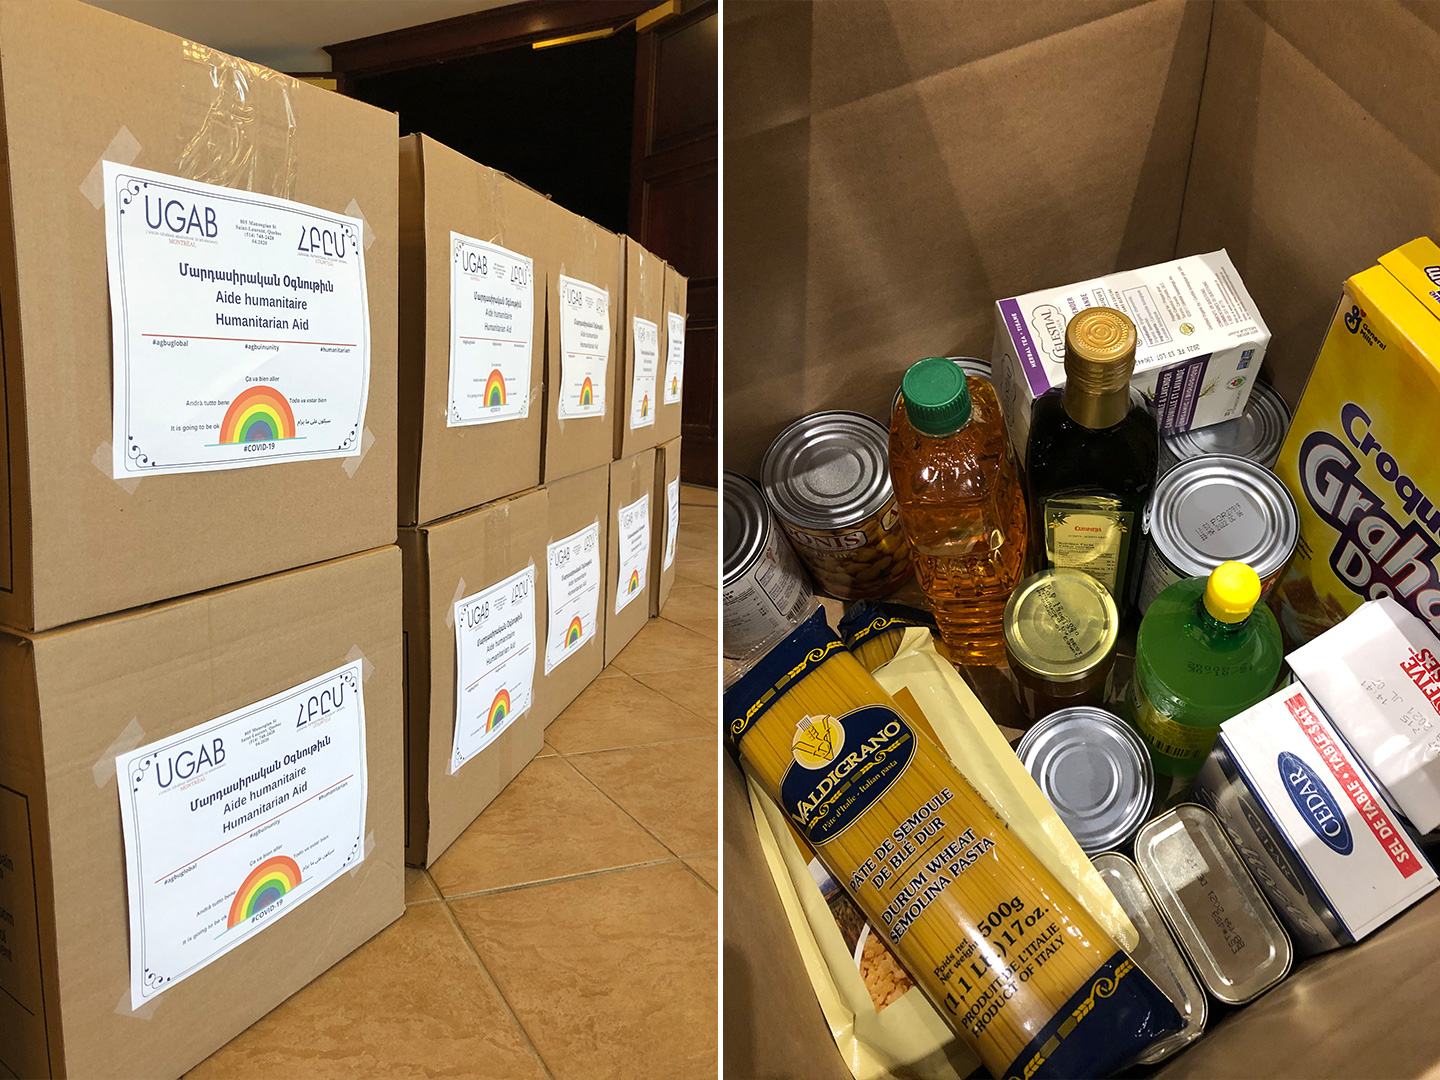 AGBU Montreal food boxes bound for vulnerable families come with a rainbow symbol of better days ahead.